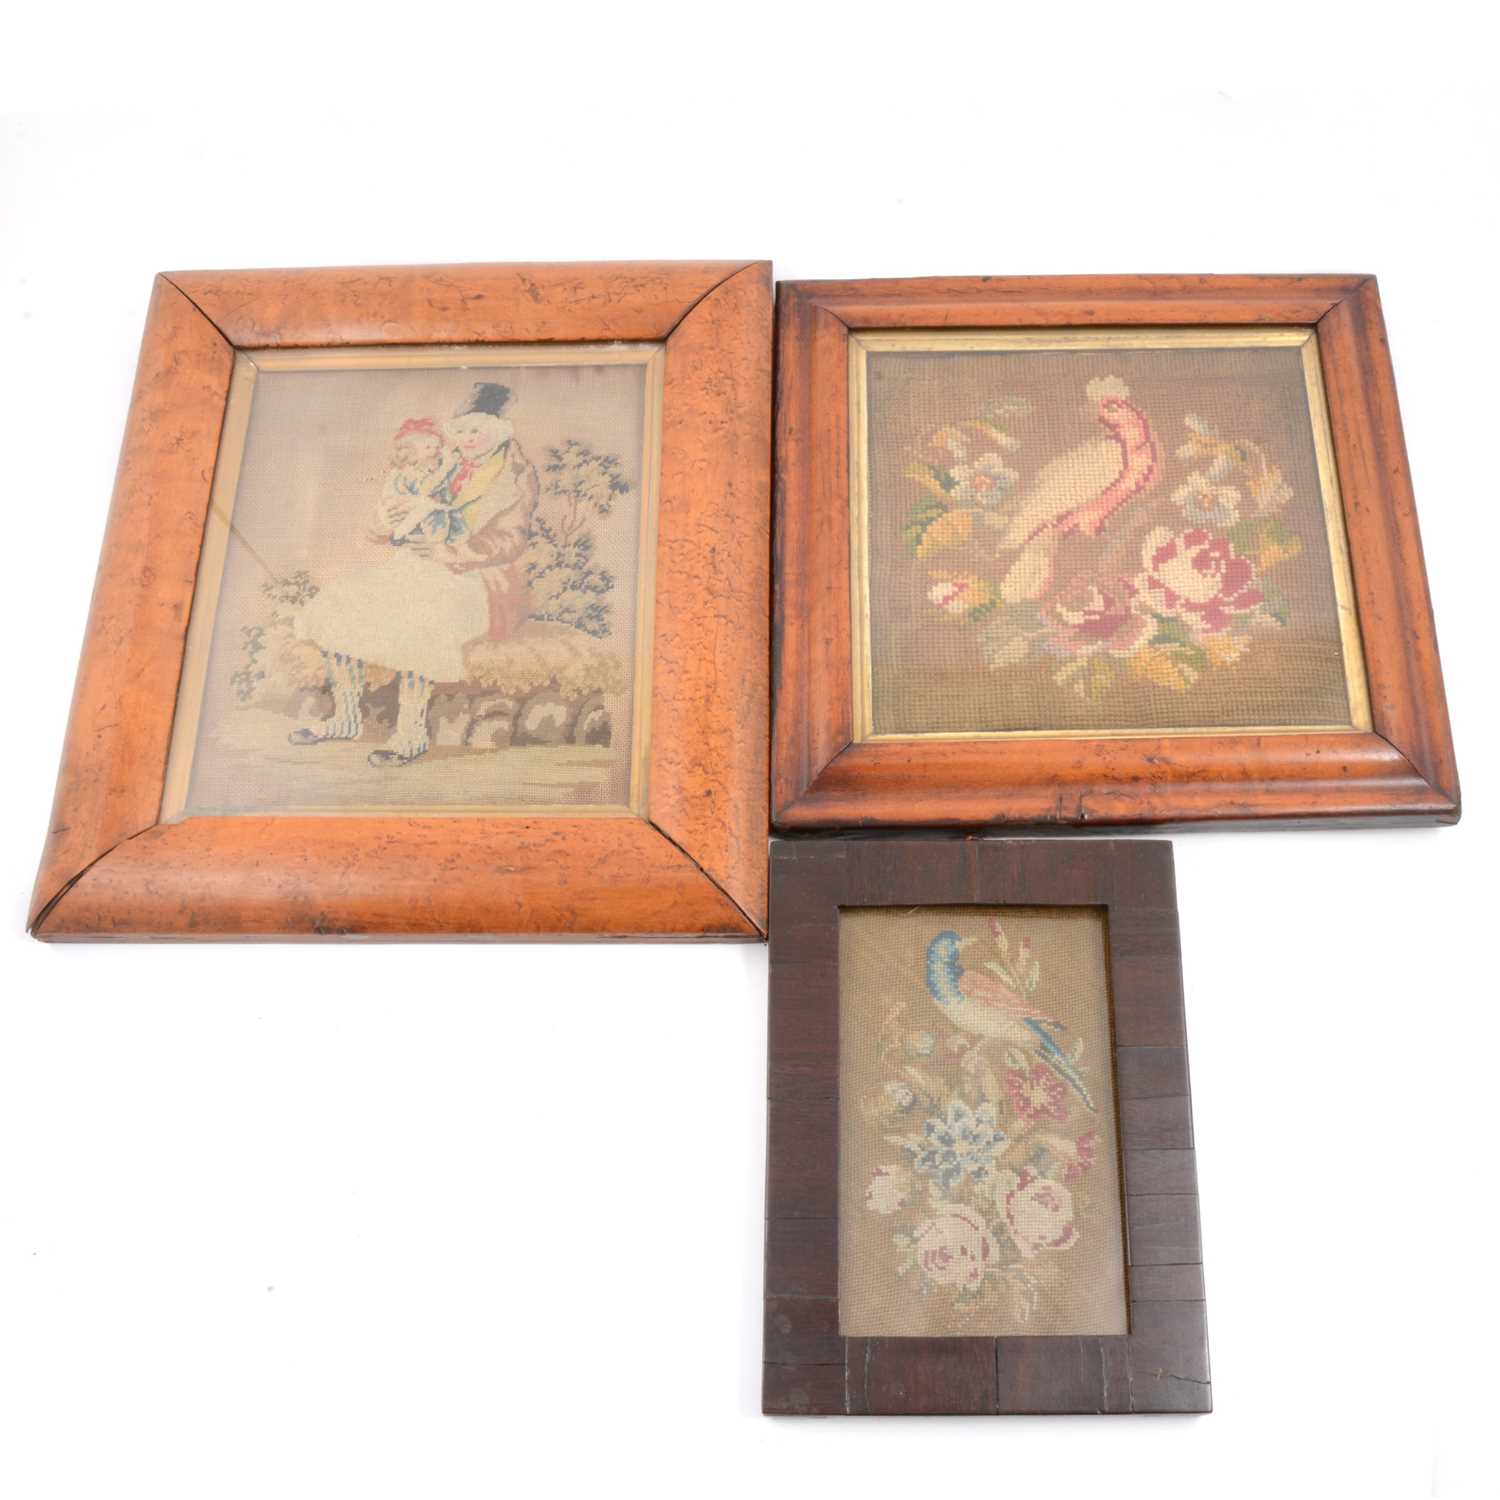 Lot 97 - Victorian sampler picture and two needlework pictures.